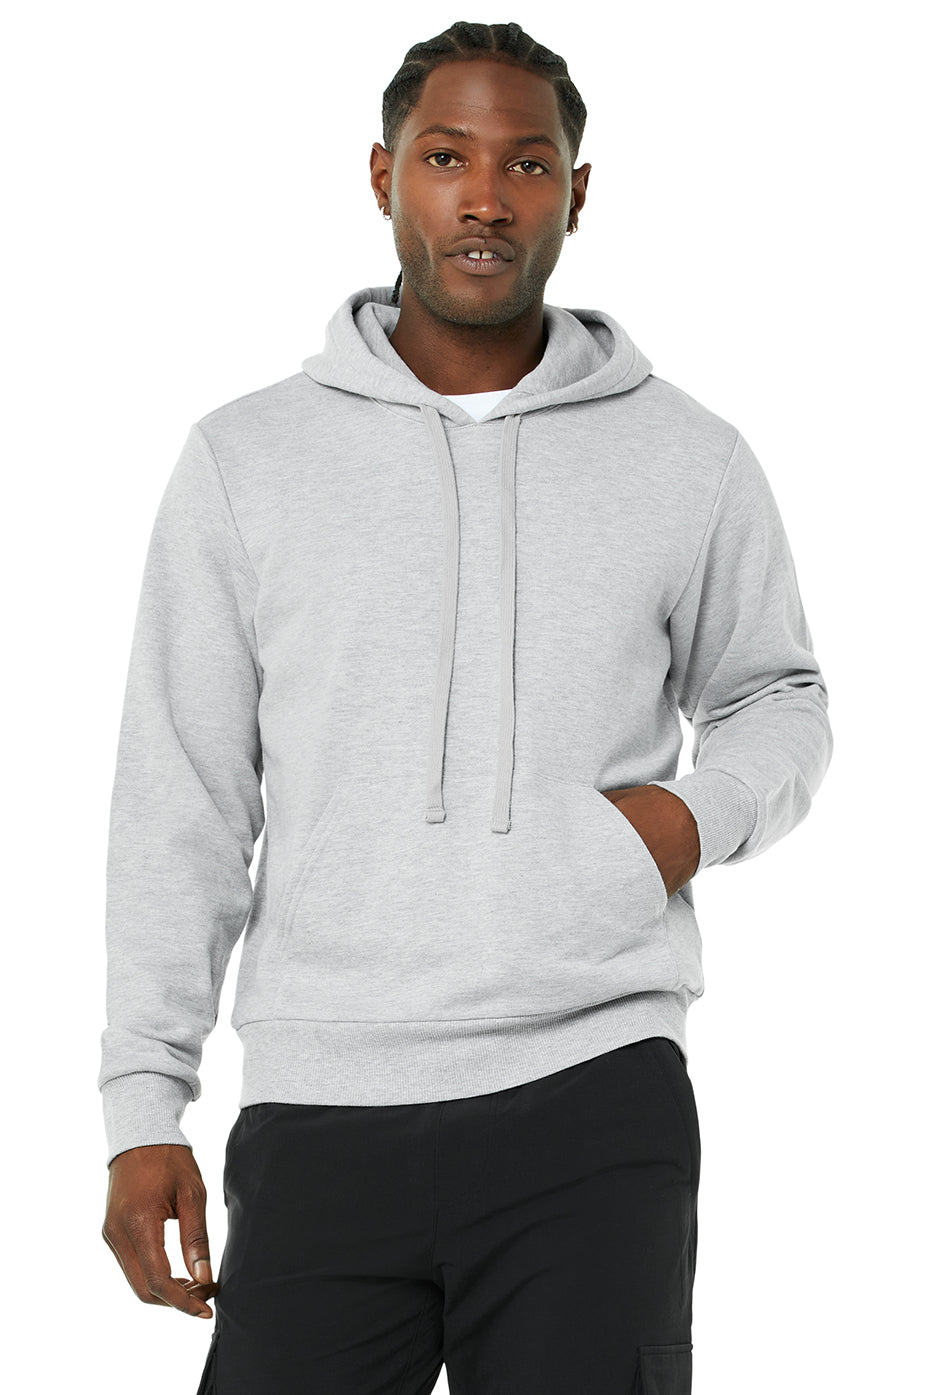 The Conquer Hoodie - Gravel  4 way stretch fabric, Hoodies, Alo yoga